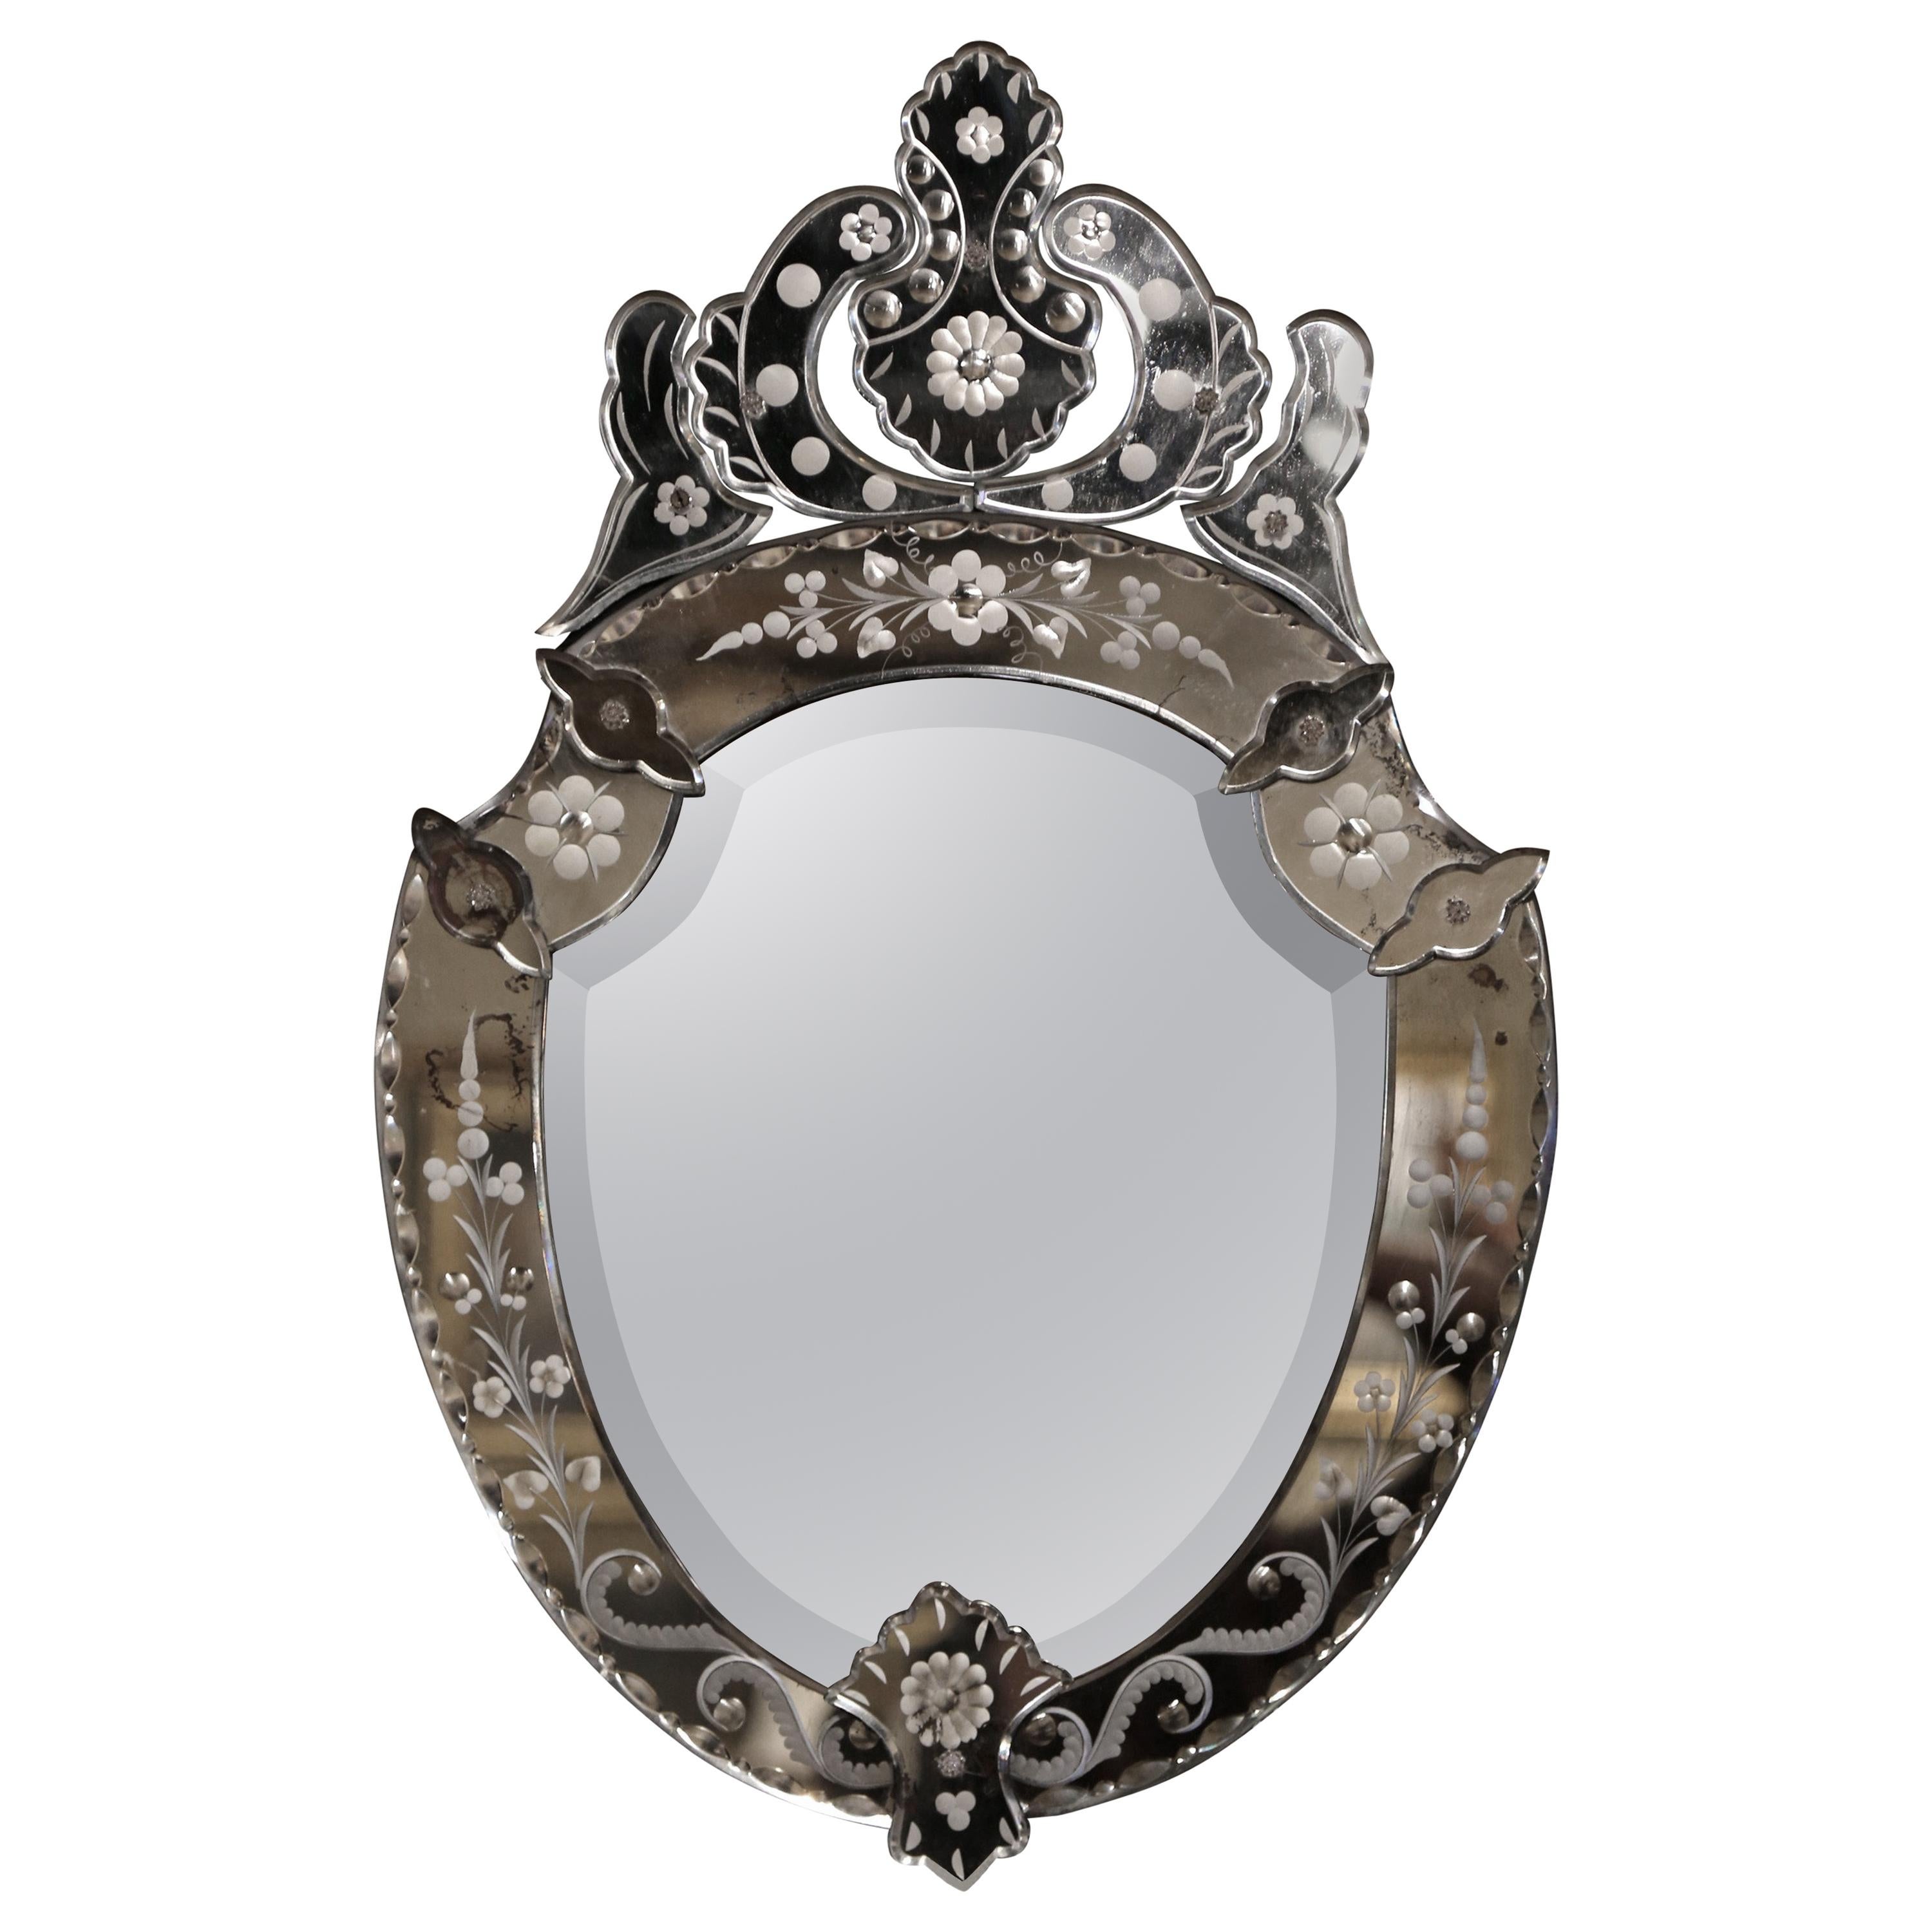 Mid-20th Century Italian Venetian Beveled Mirror with Painted Floral Etching